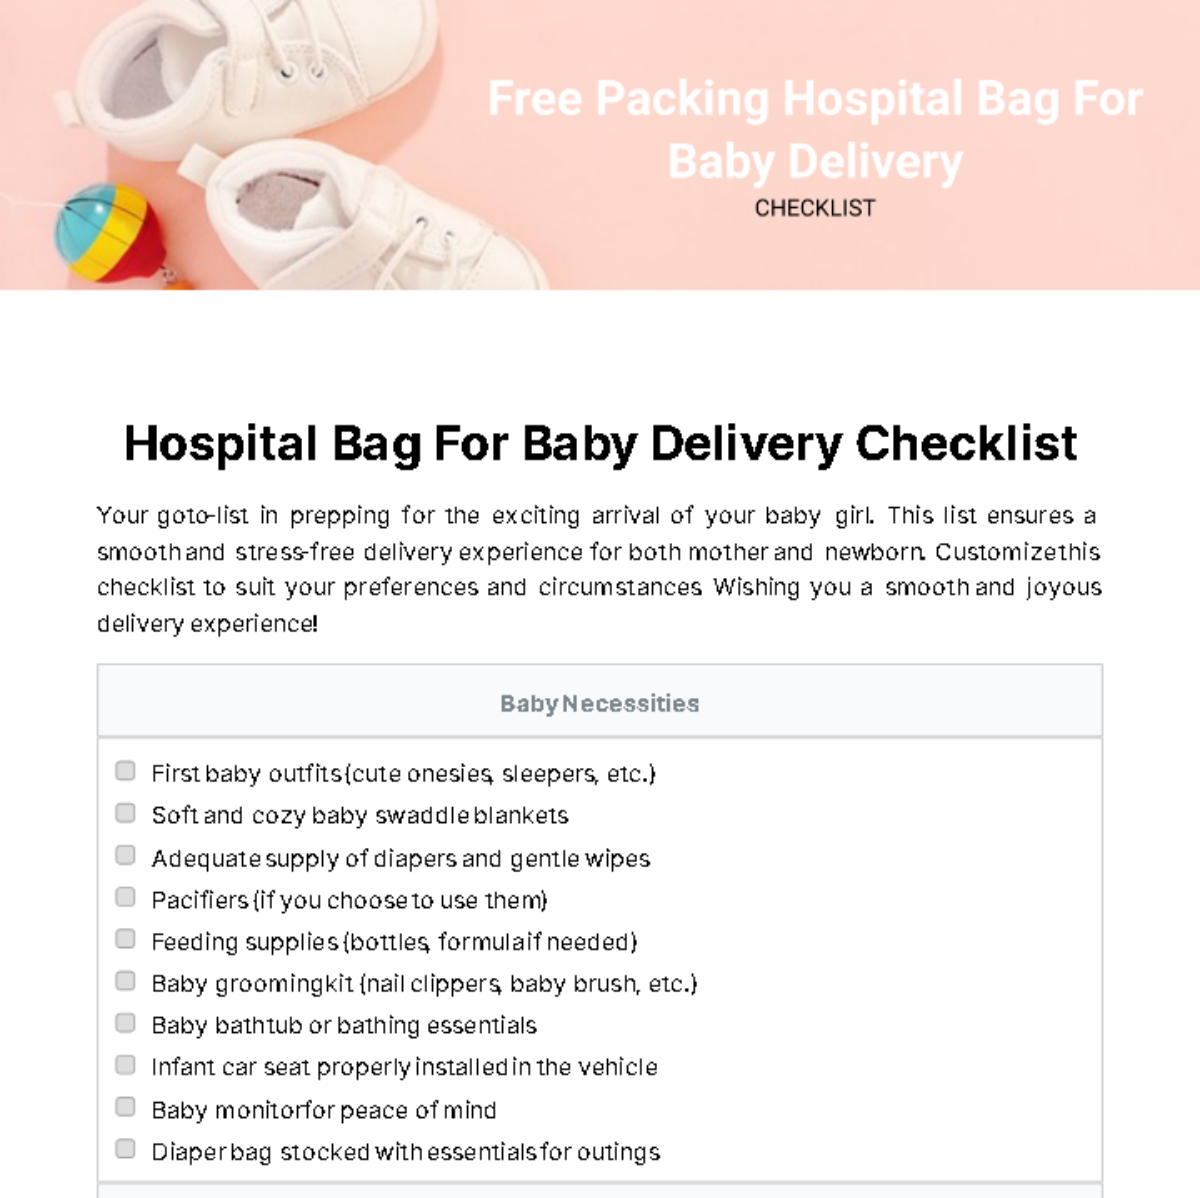 Packing Hospital Bag For Baby Delivery Checklist Template